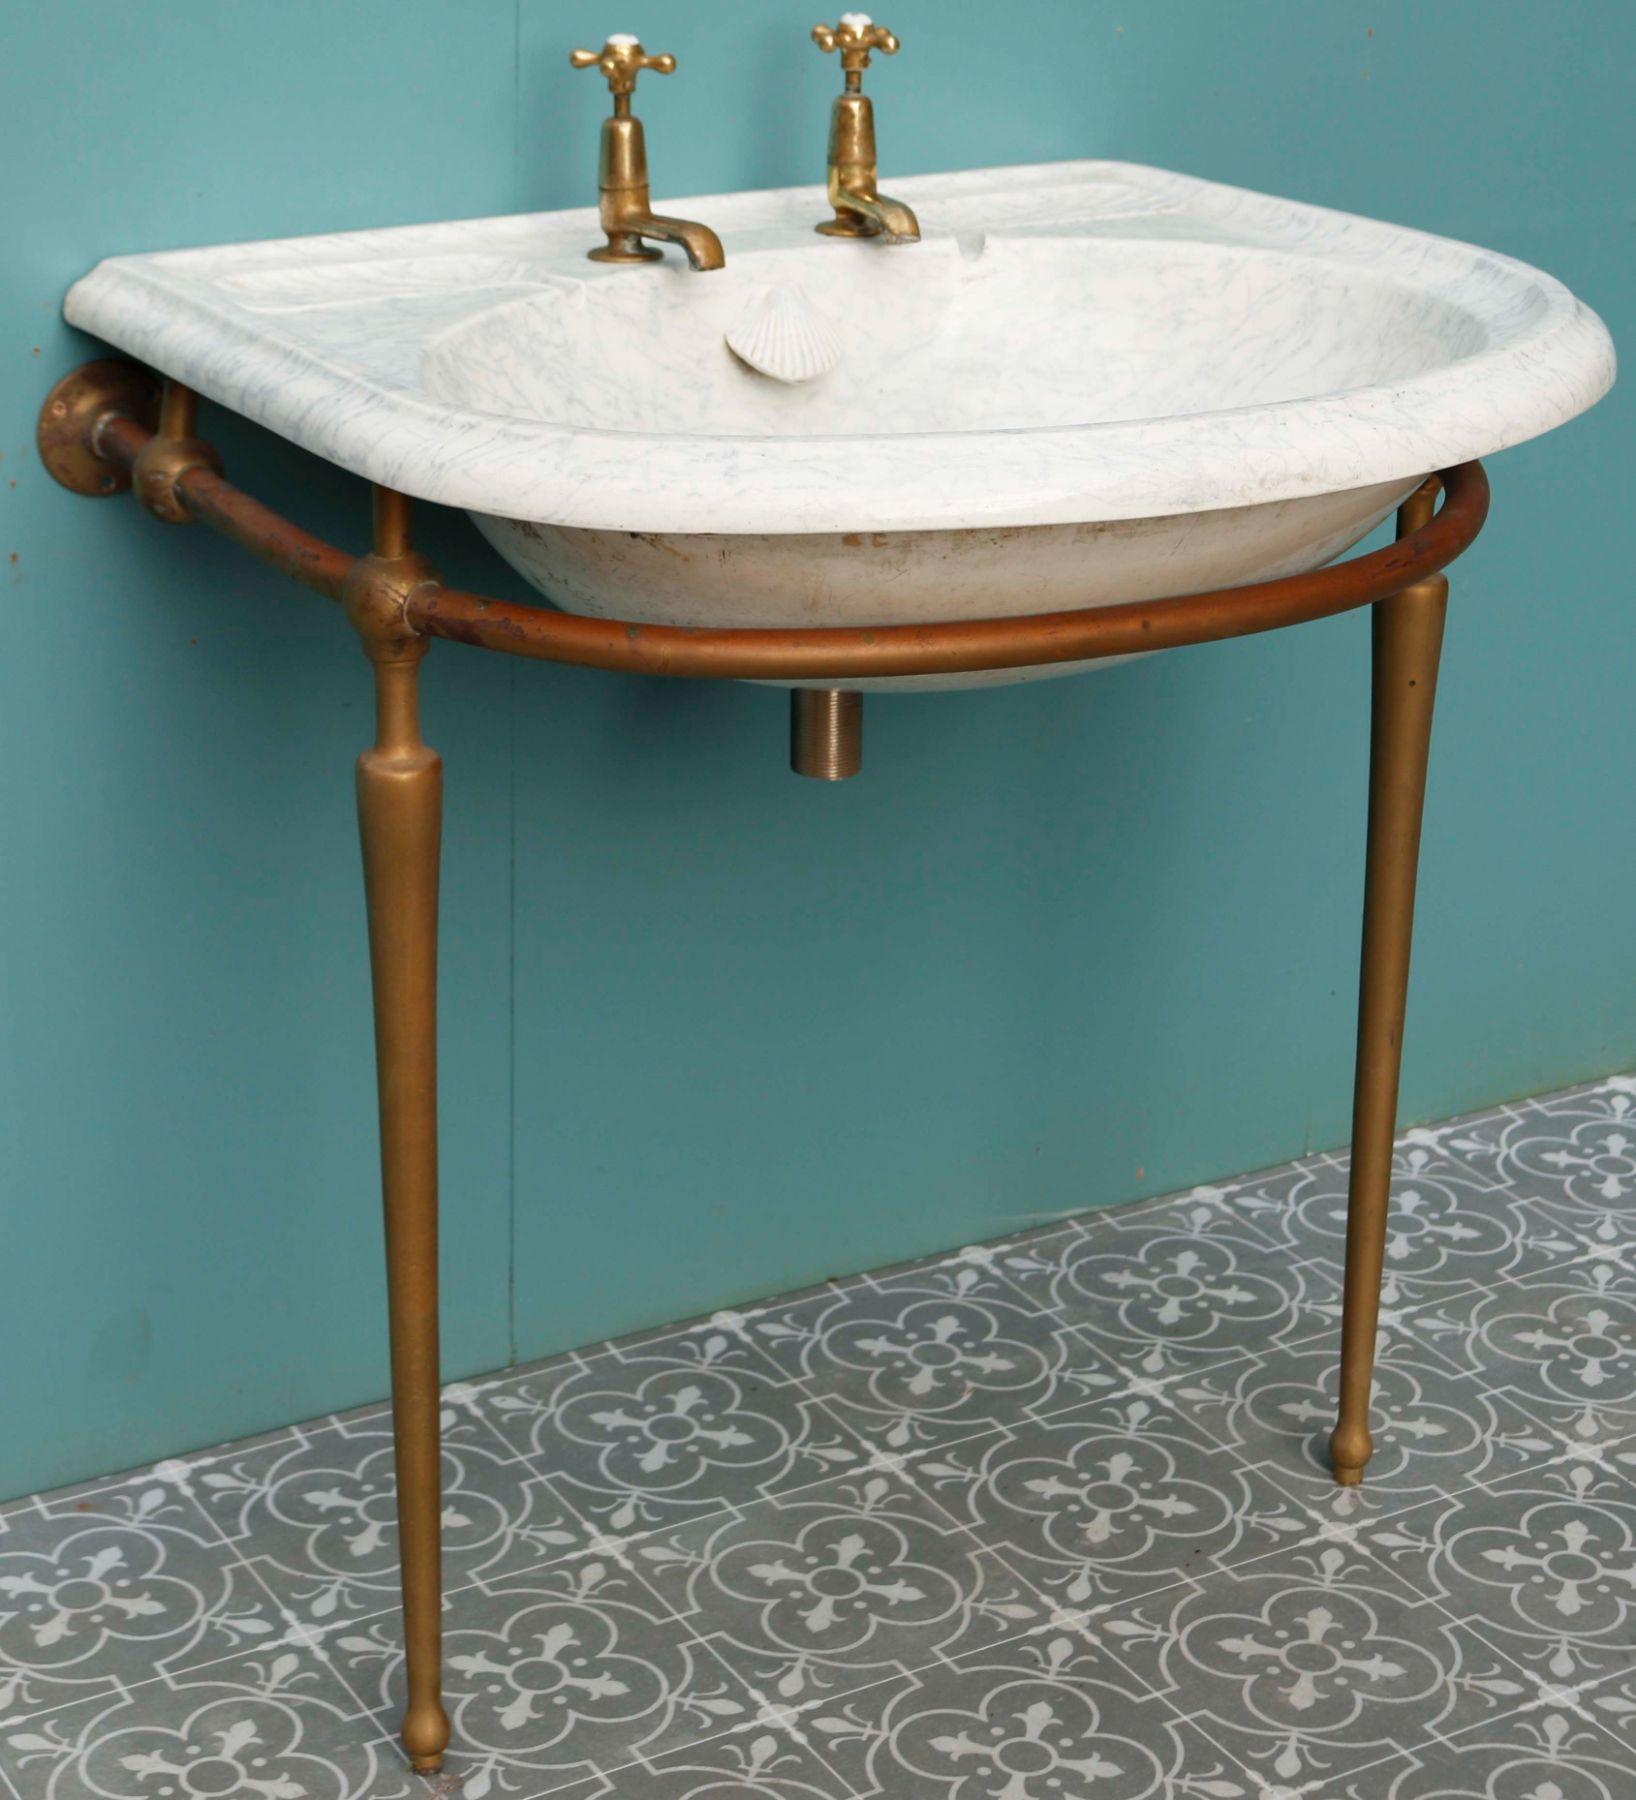 Antique Rounded Marble Effect Sink 1